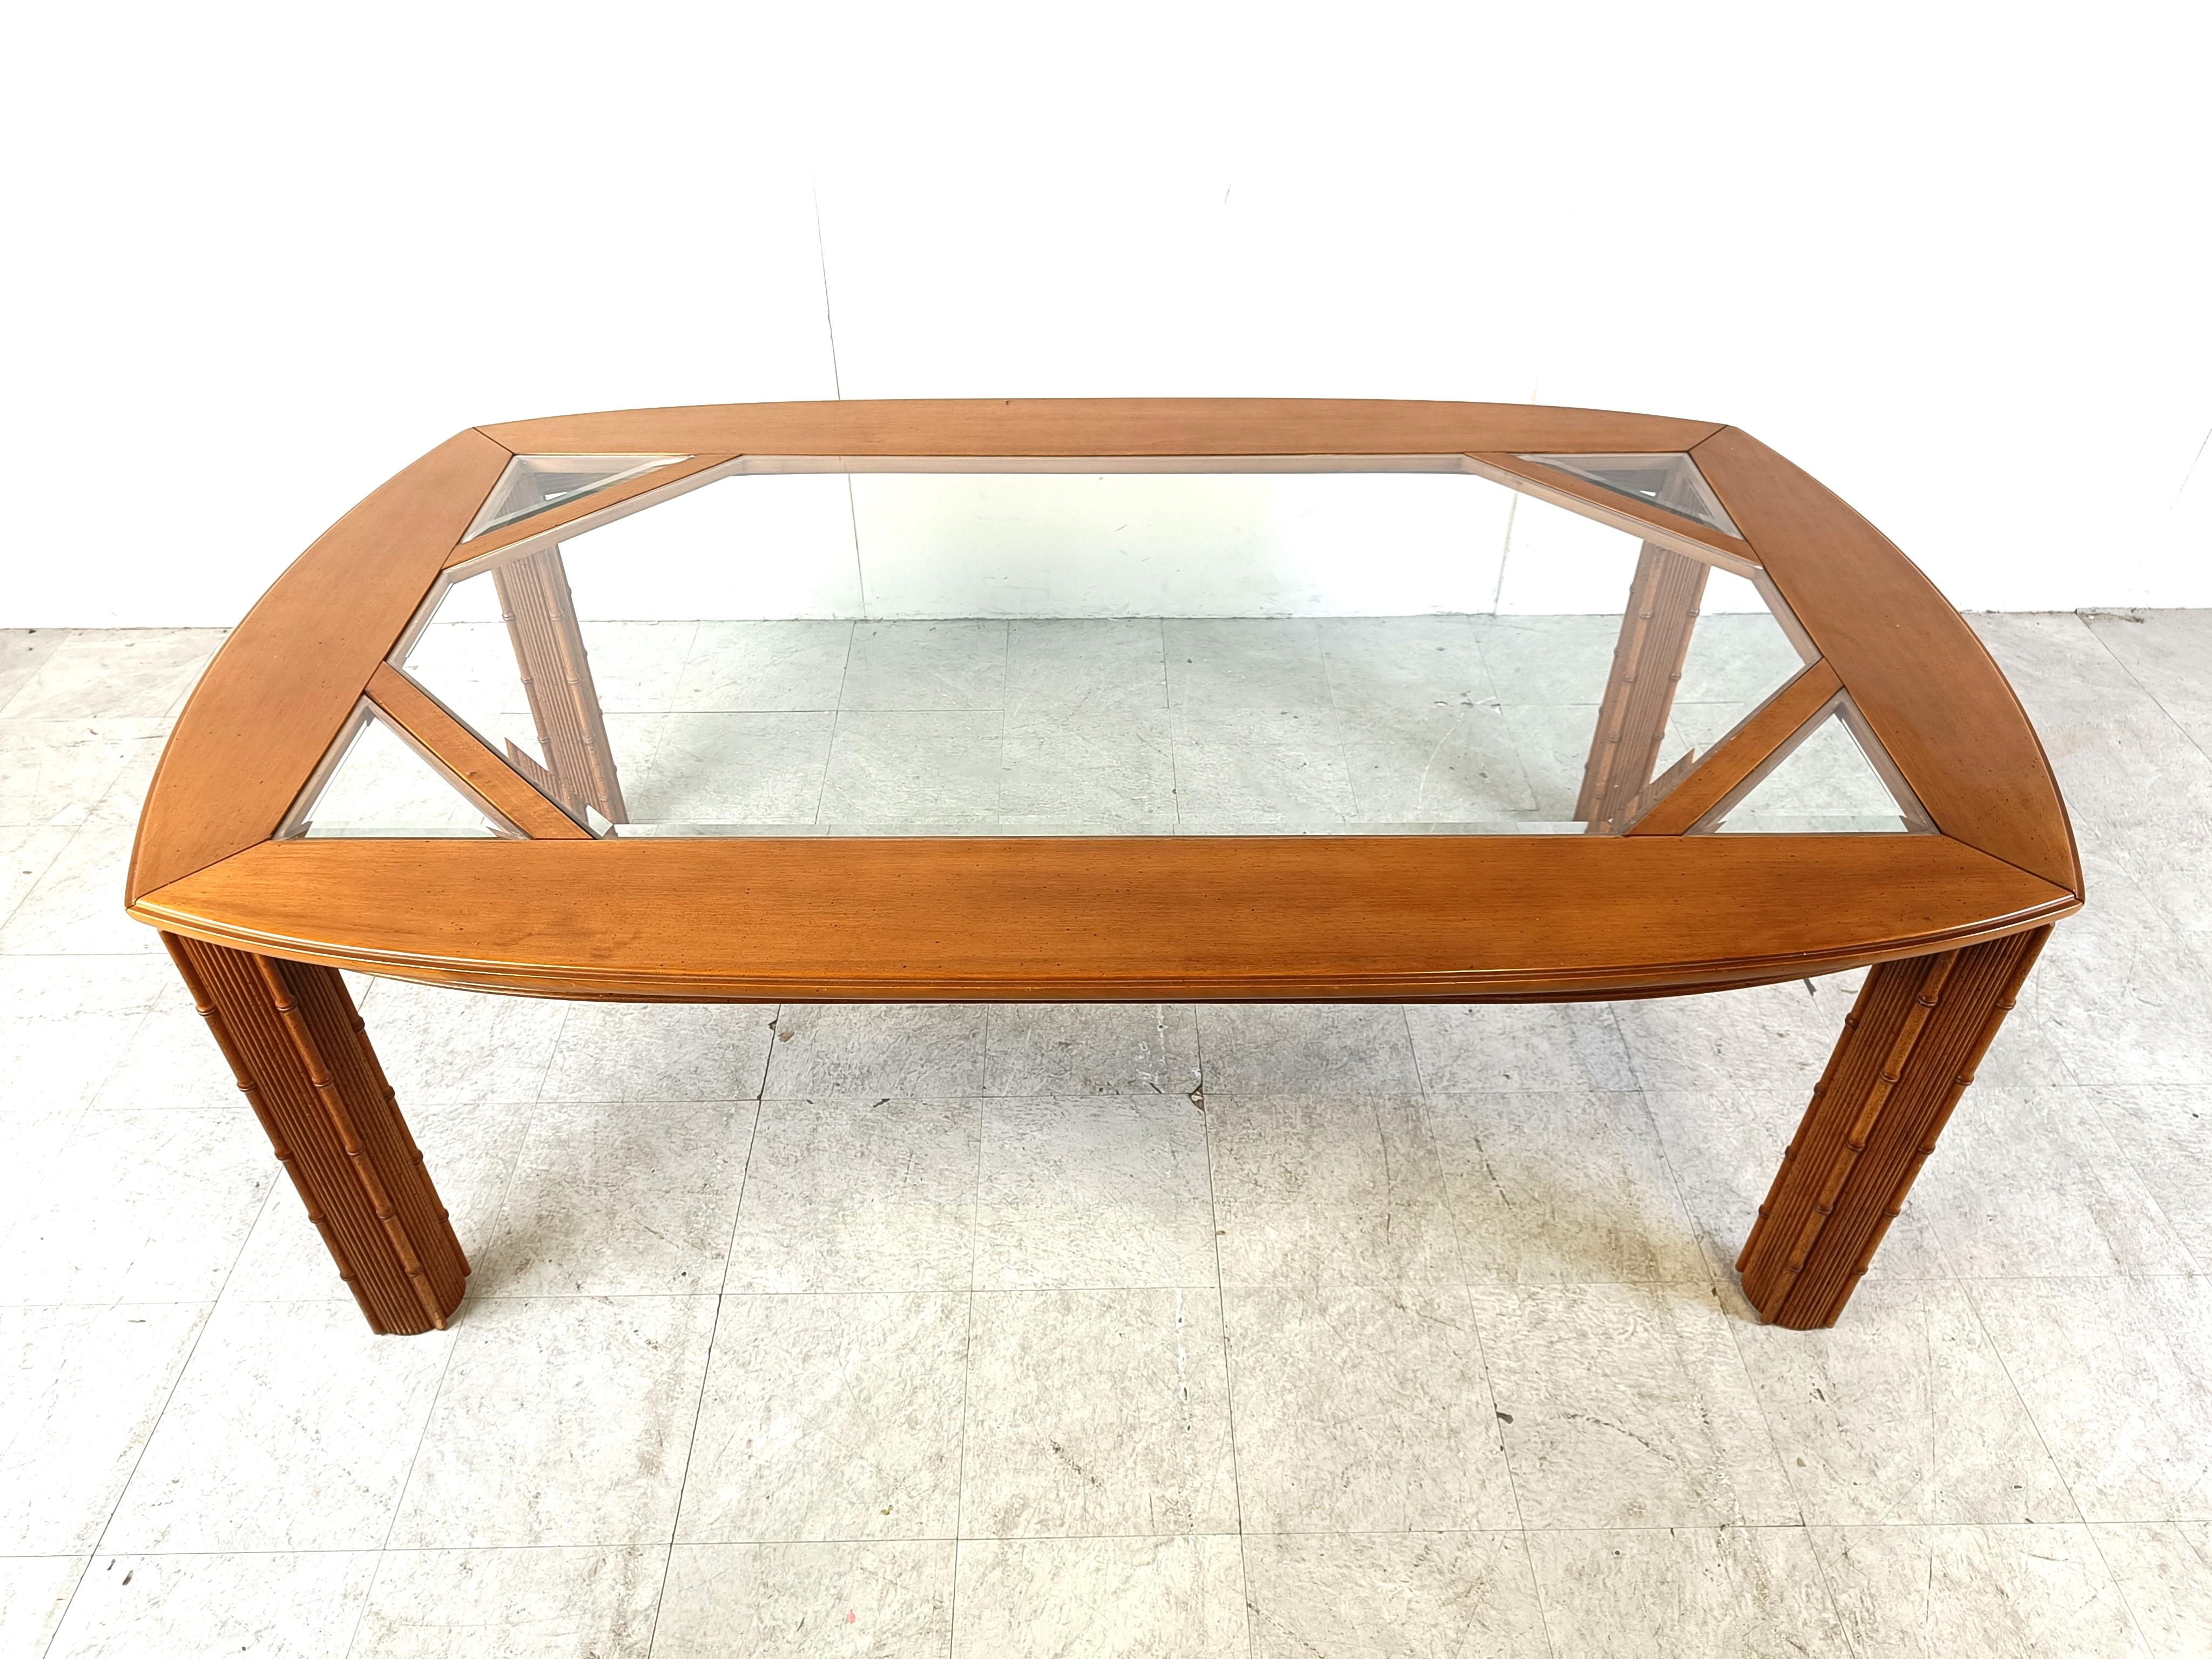 Vintage chinoiserie faux bamboo wooden dining table with 4 legs, a rounded table top with beveled inlaid glass.

Beautiful and very elegant dining table.

1970s - France

Very good condition

Dimensions:
Height: 70cm/27.55